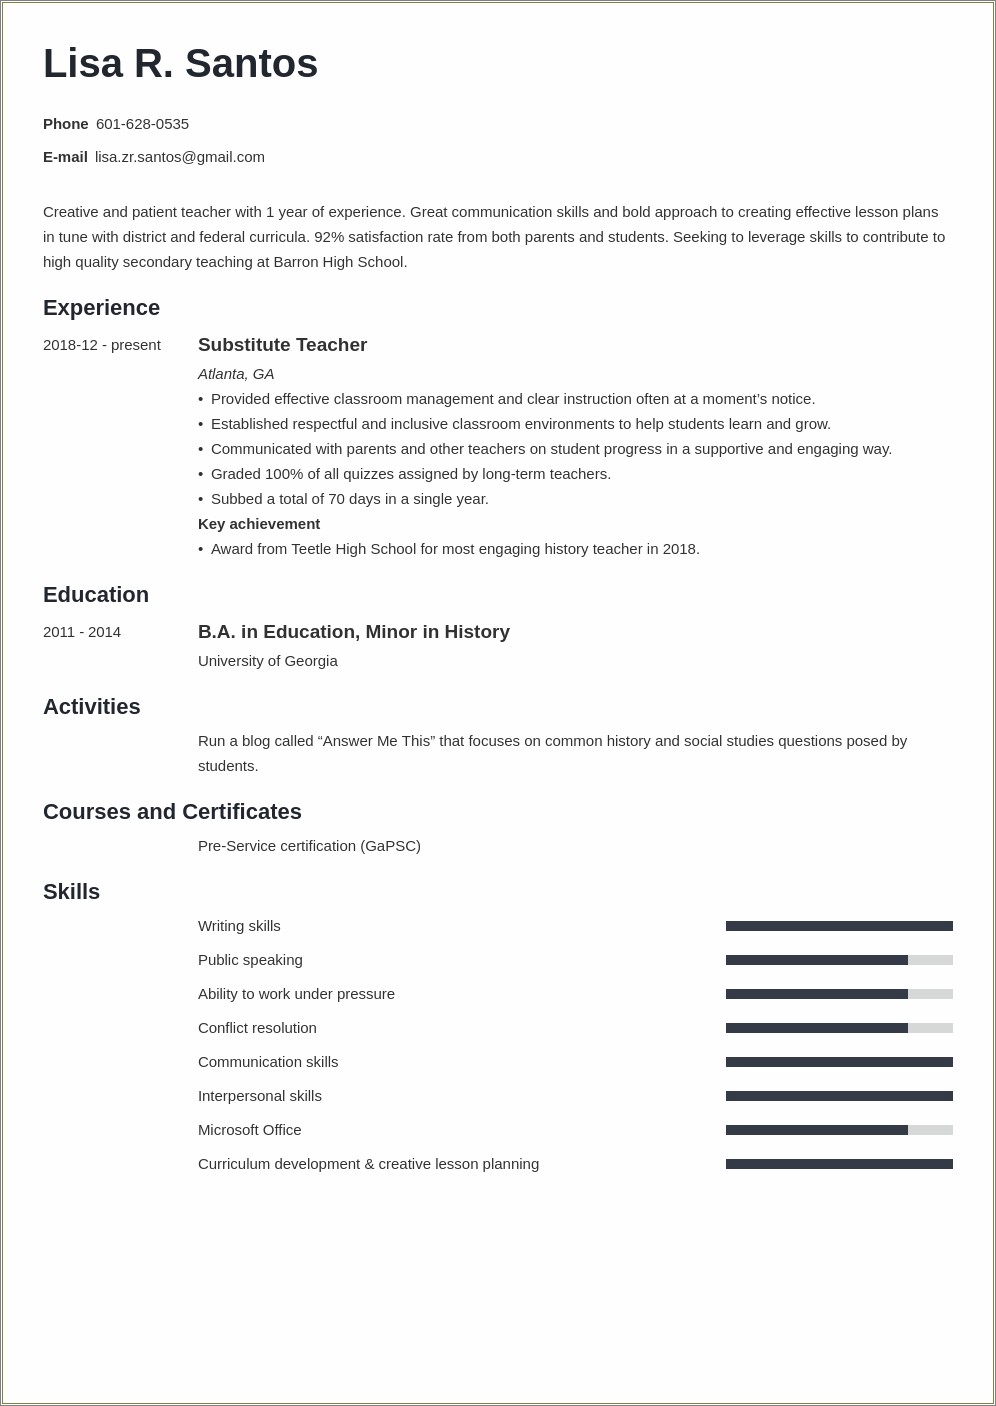 Resume Sample For A Teacher With No Experience